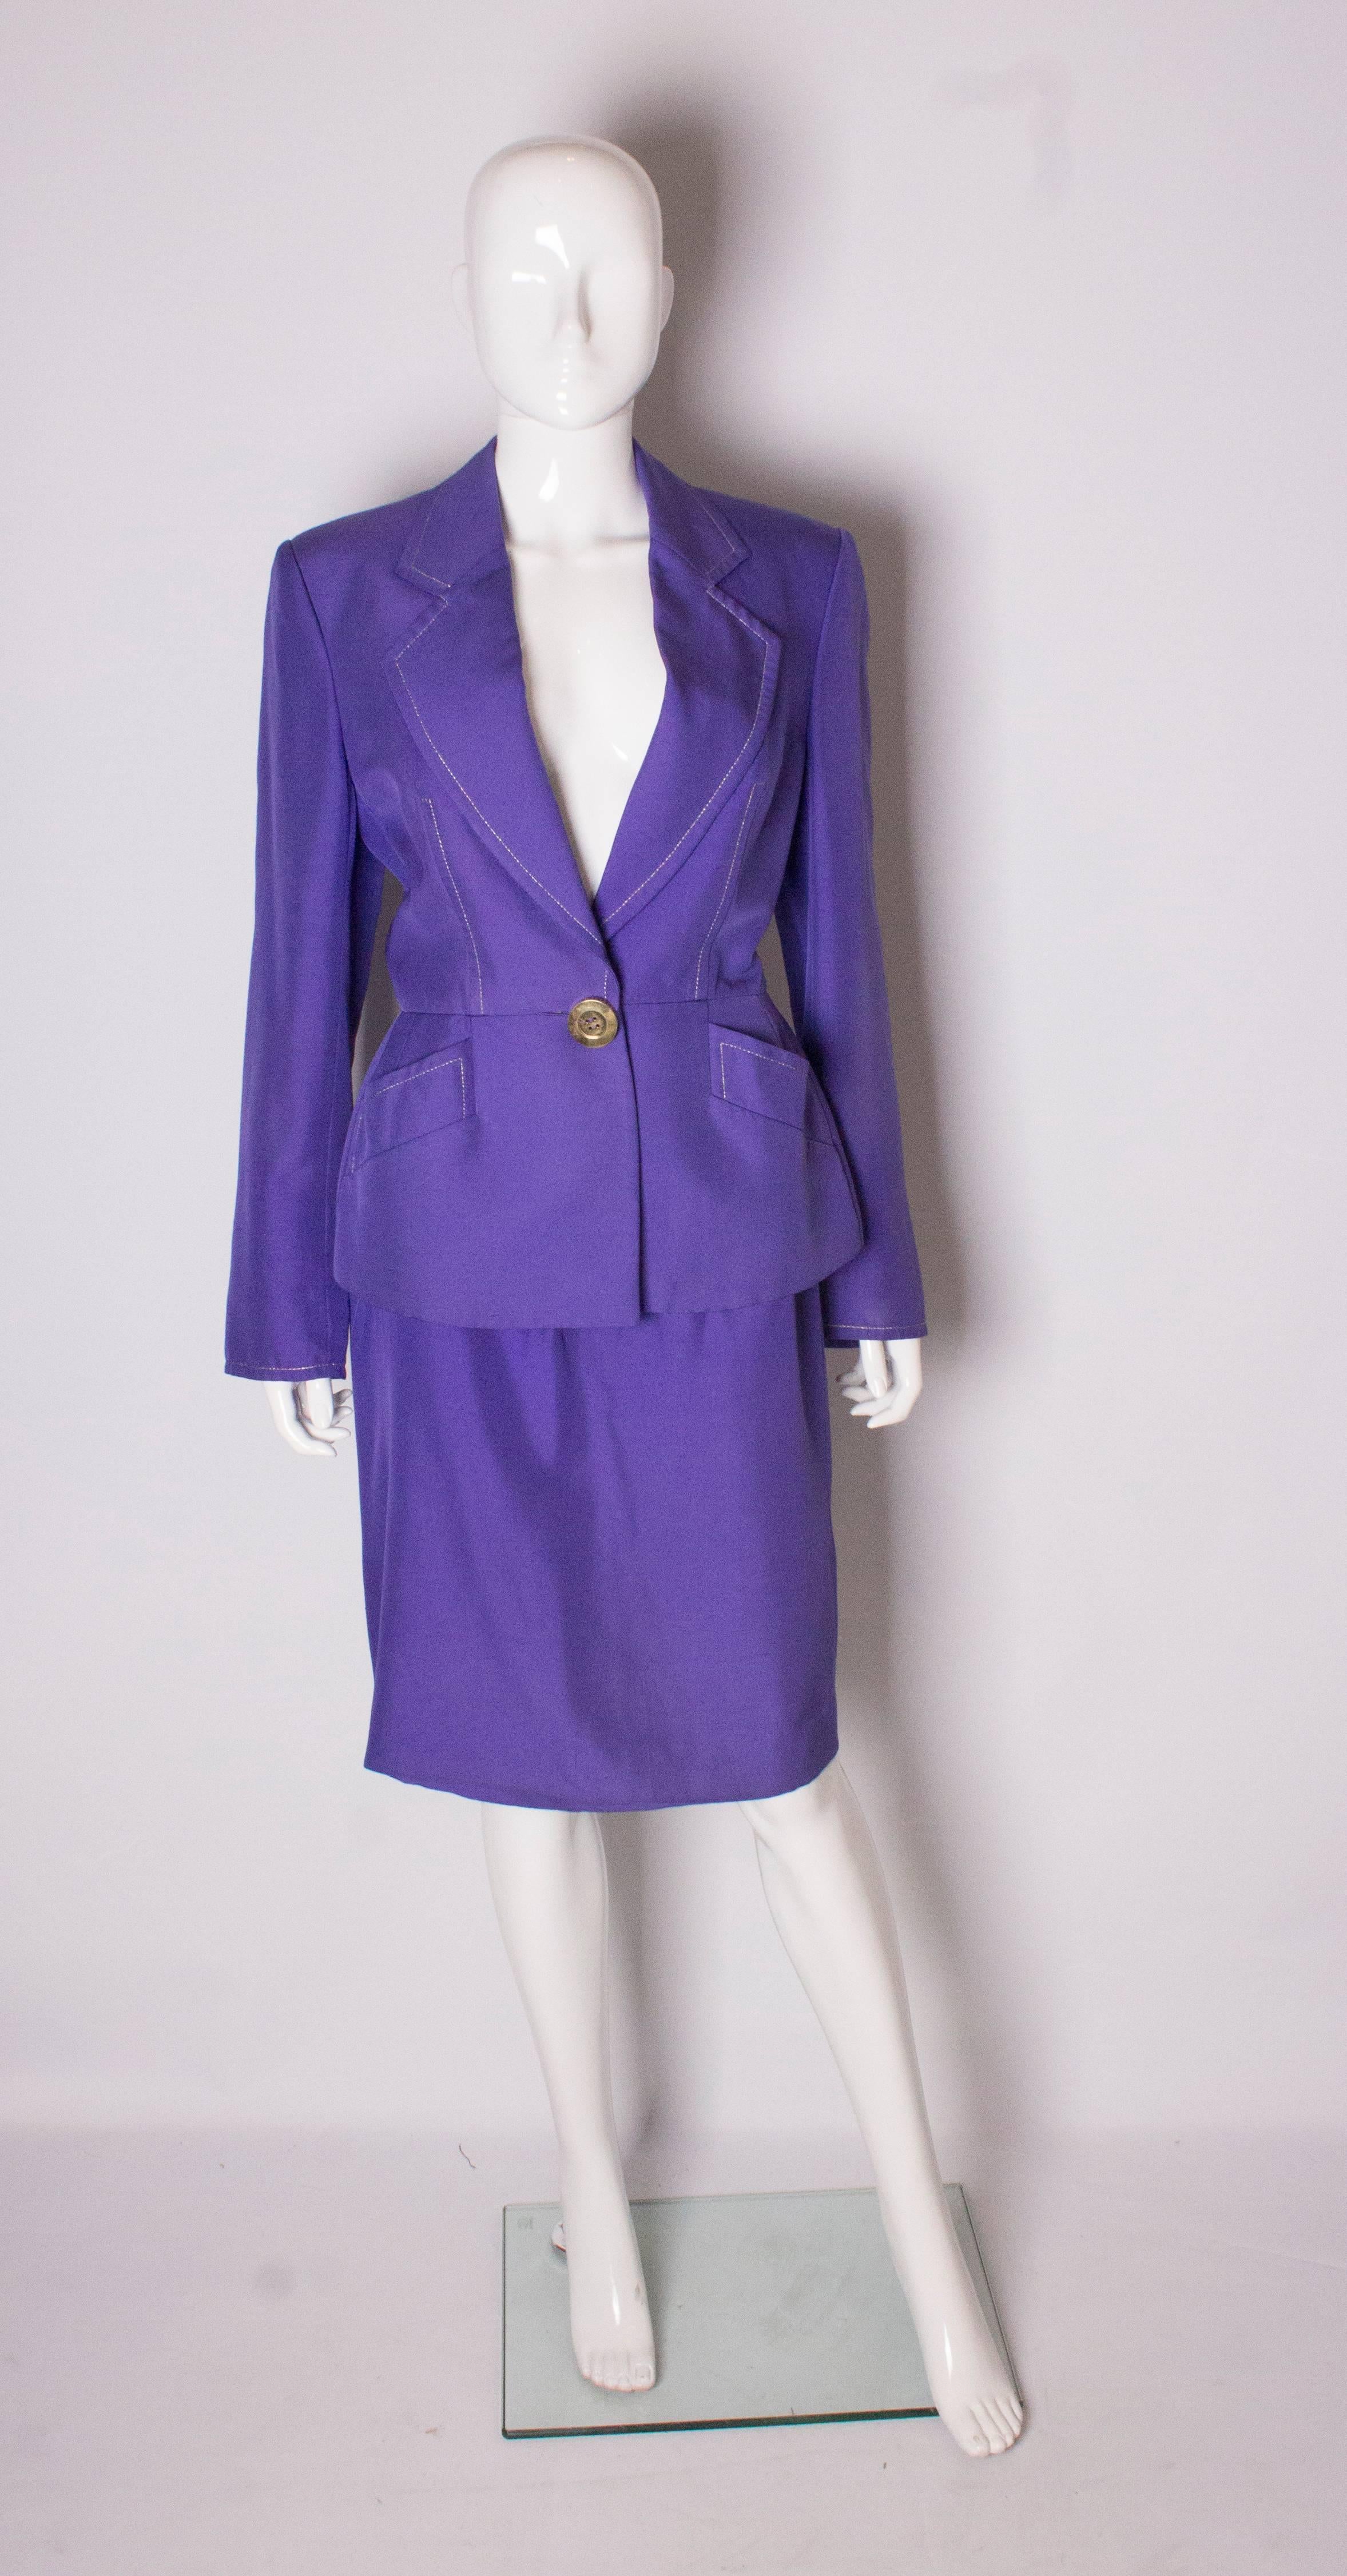 A stunning vintage silk  suit by Christian Dior in this season colour, purple.
The jacket has a v neckline with gold thread , 2 pockets at waist leval and a one button fastening. It is lined in silk and number 84017, and size 42.
The matching pencil